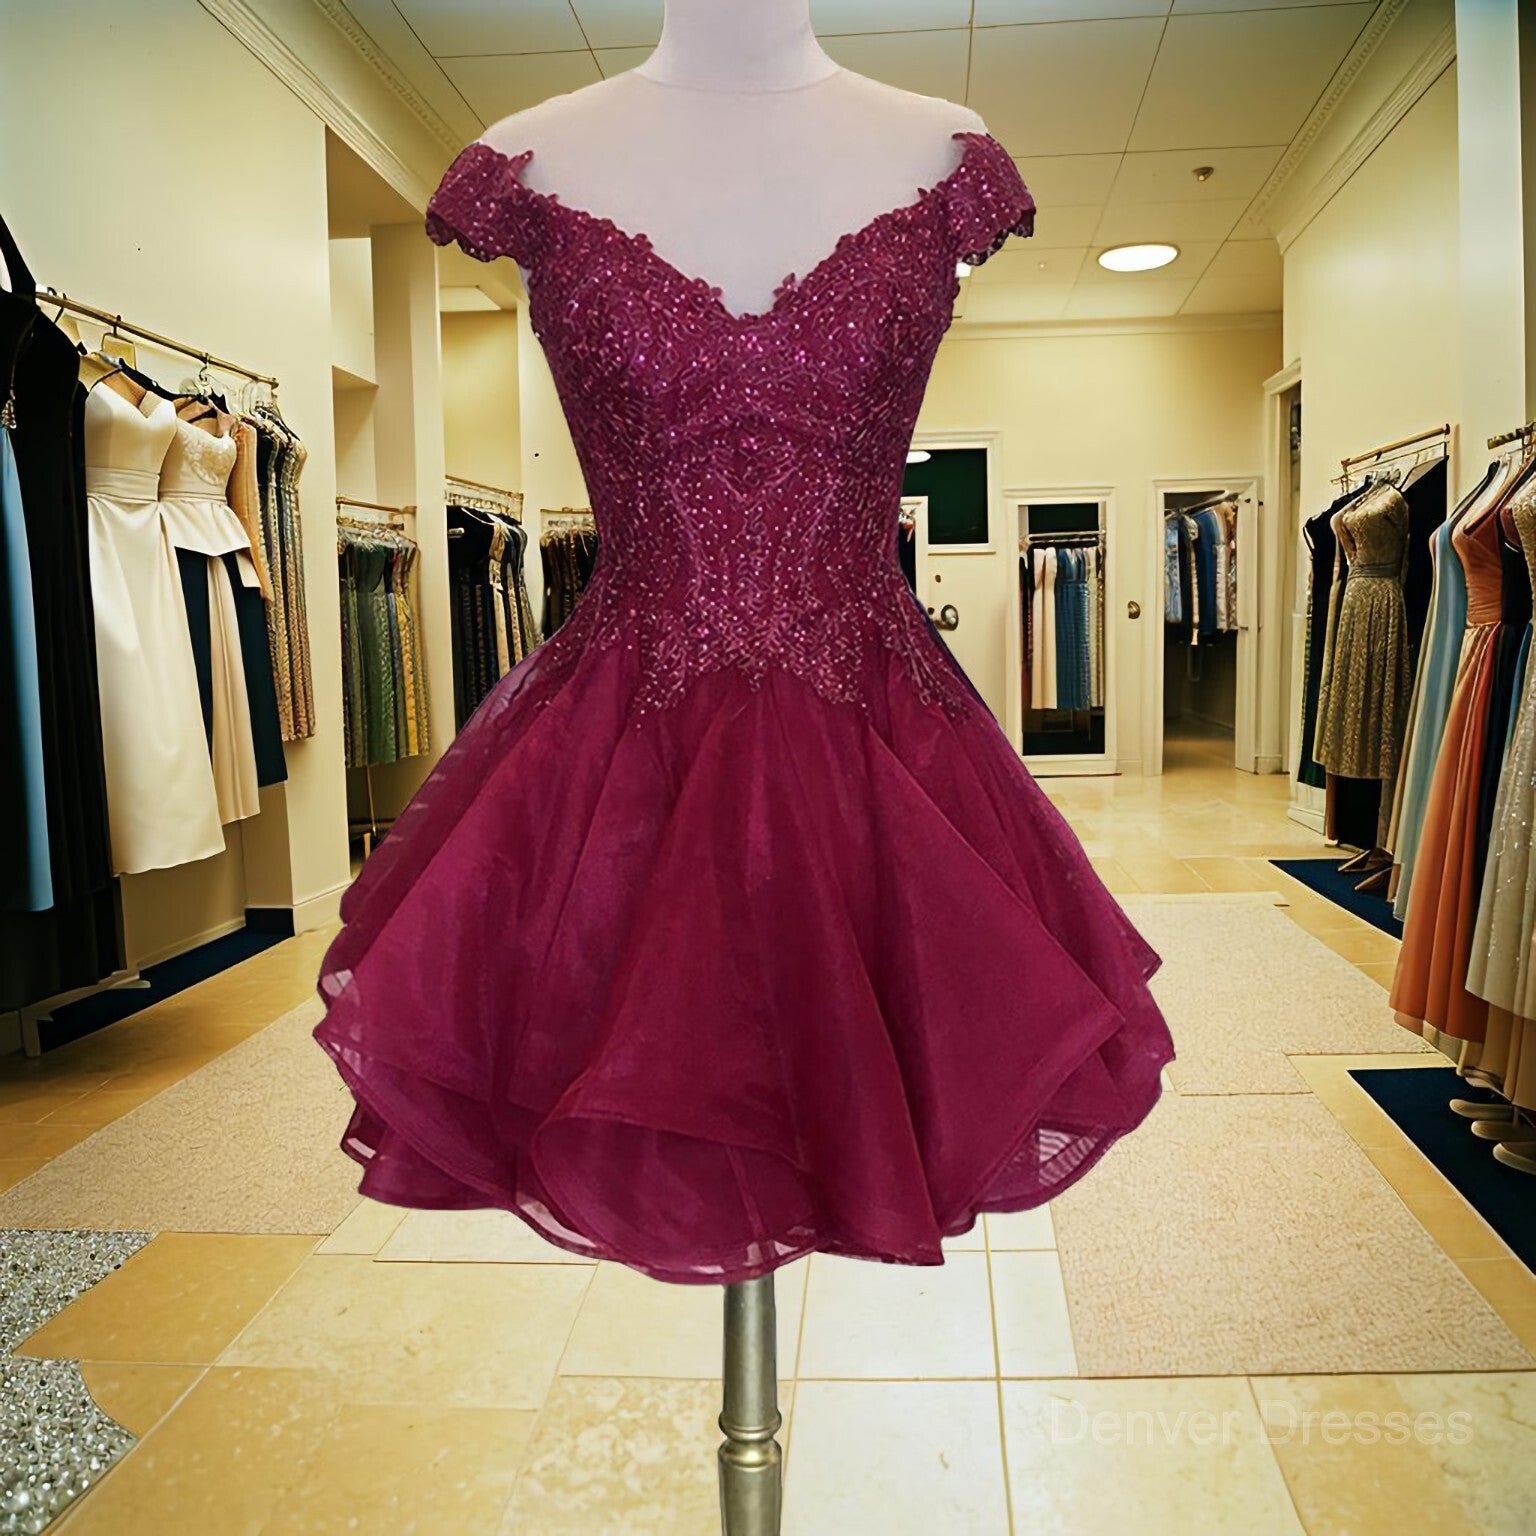 Party Dress Outfits Ideas, A-Line/Princess V-neck Short/Mini Organza Homecoming Dresses With Beading